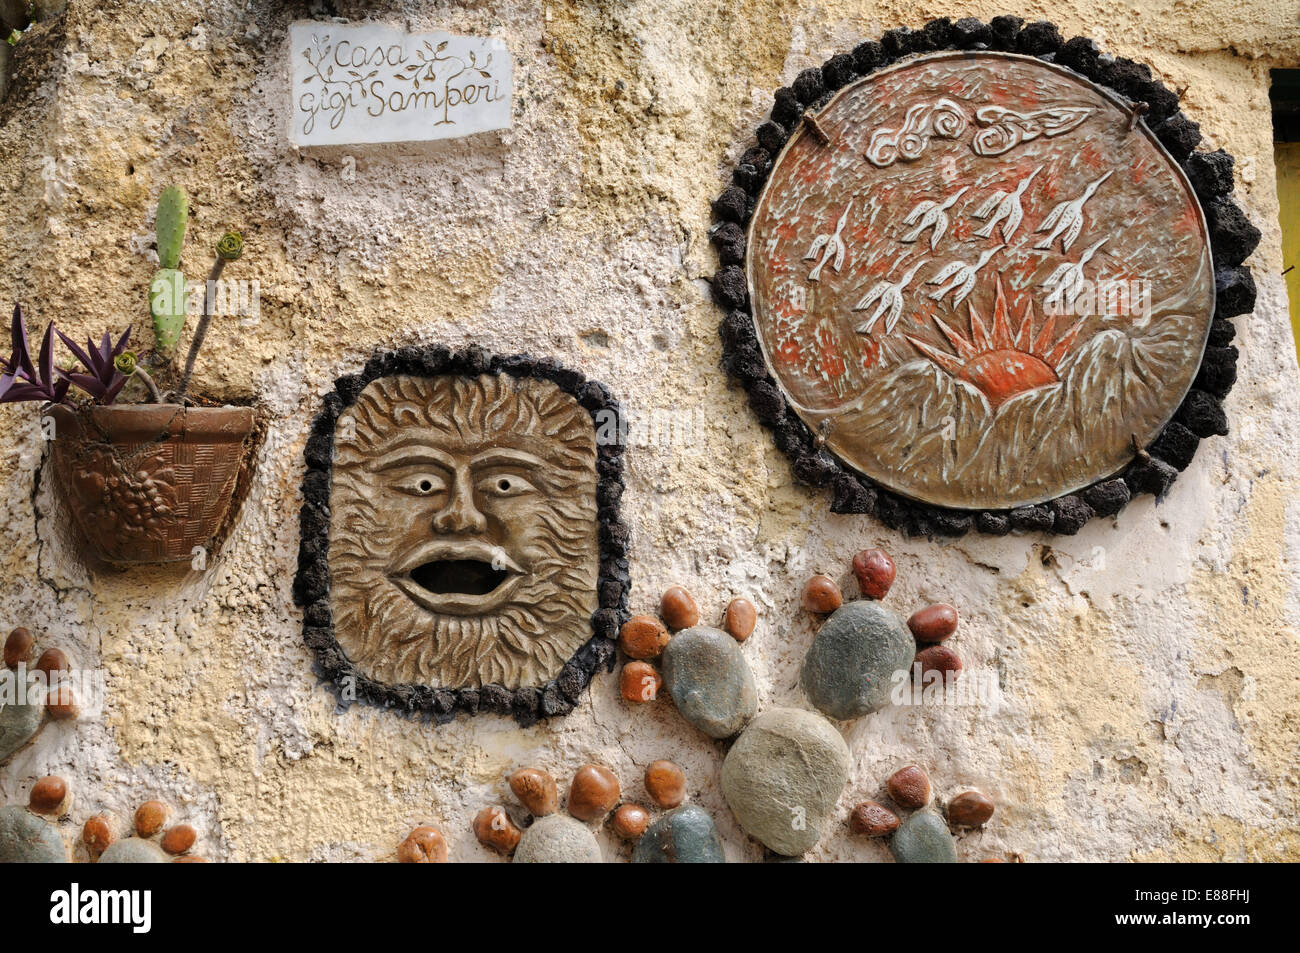 Traditional art on the wall of a galley on a path between Taormina and Castelmola Sicily Italy Stock Photo